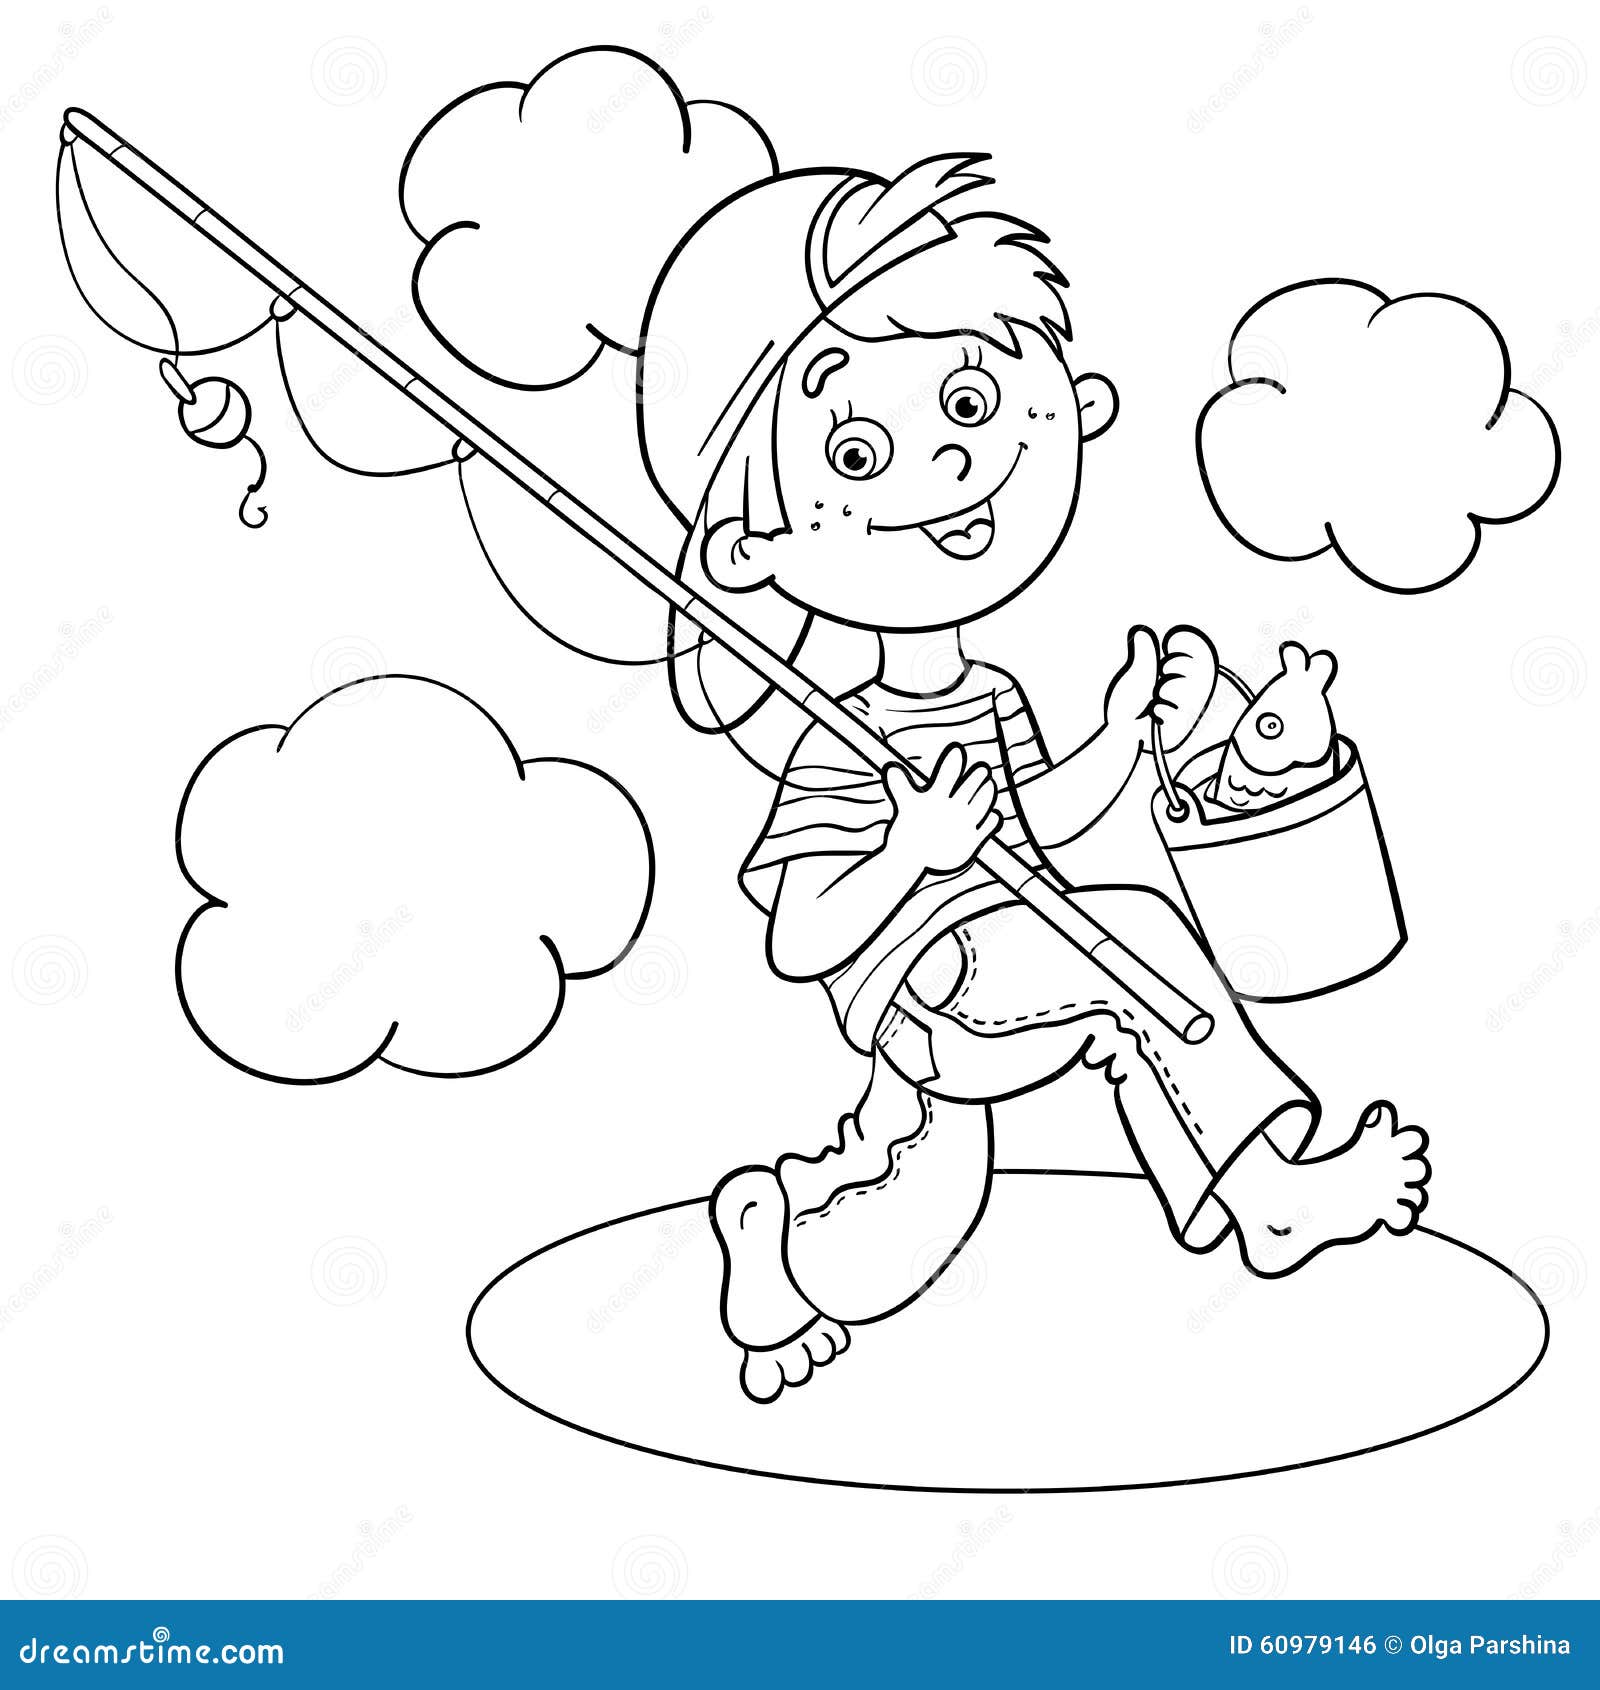 Coloring Page Outline Of A Cartoon Boy Fisherman Stock Photo  Image: 60979146